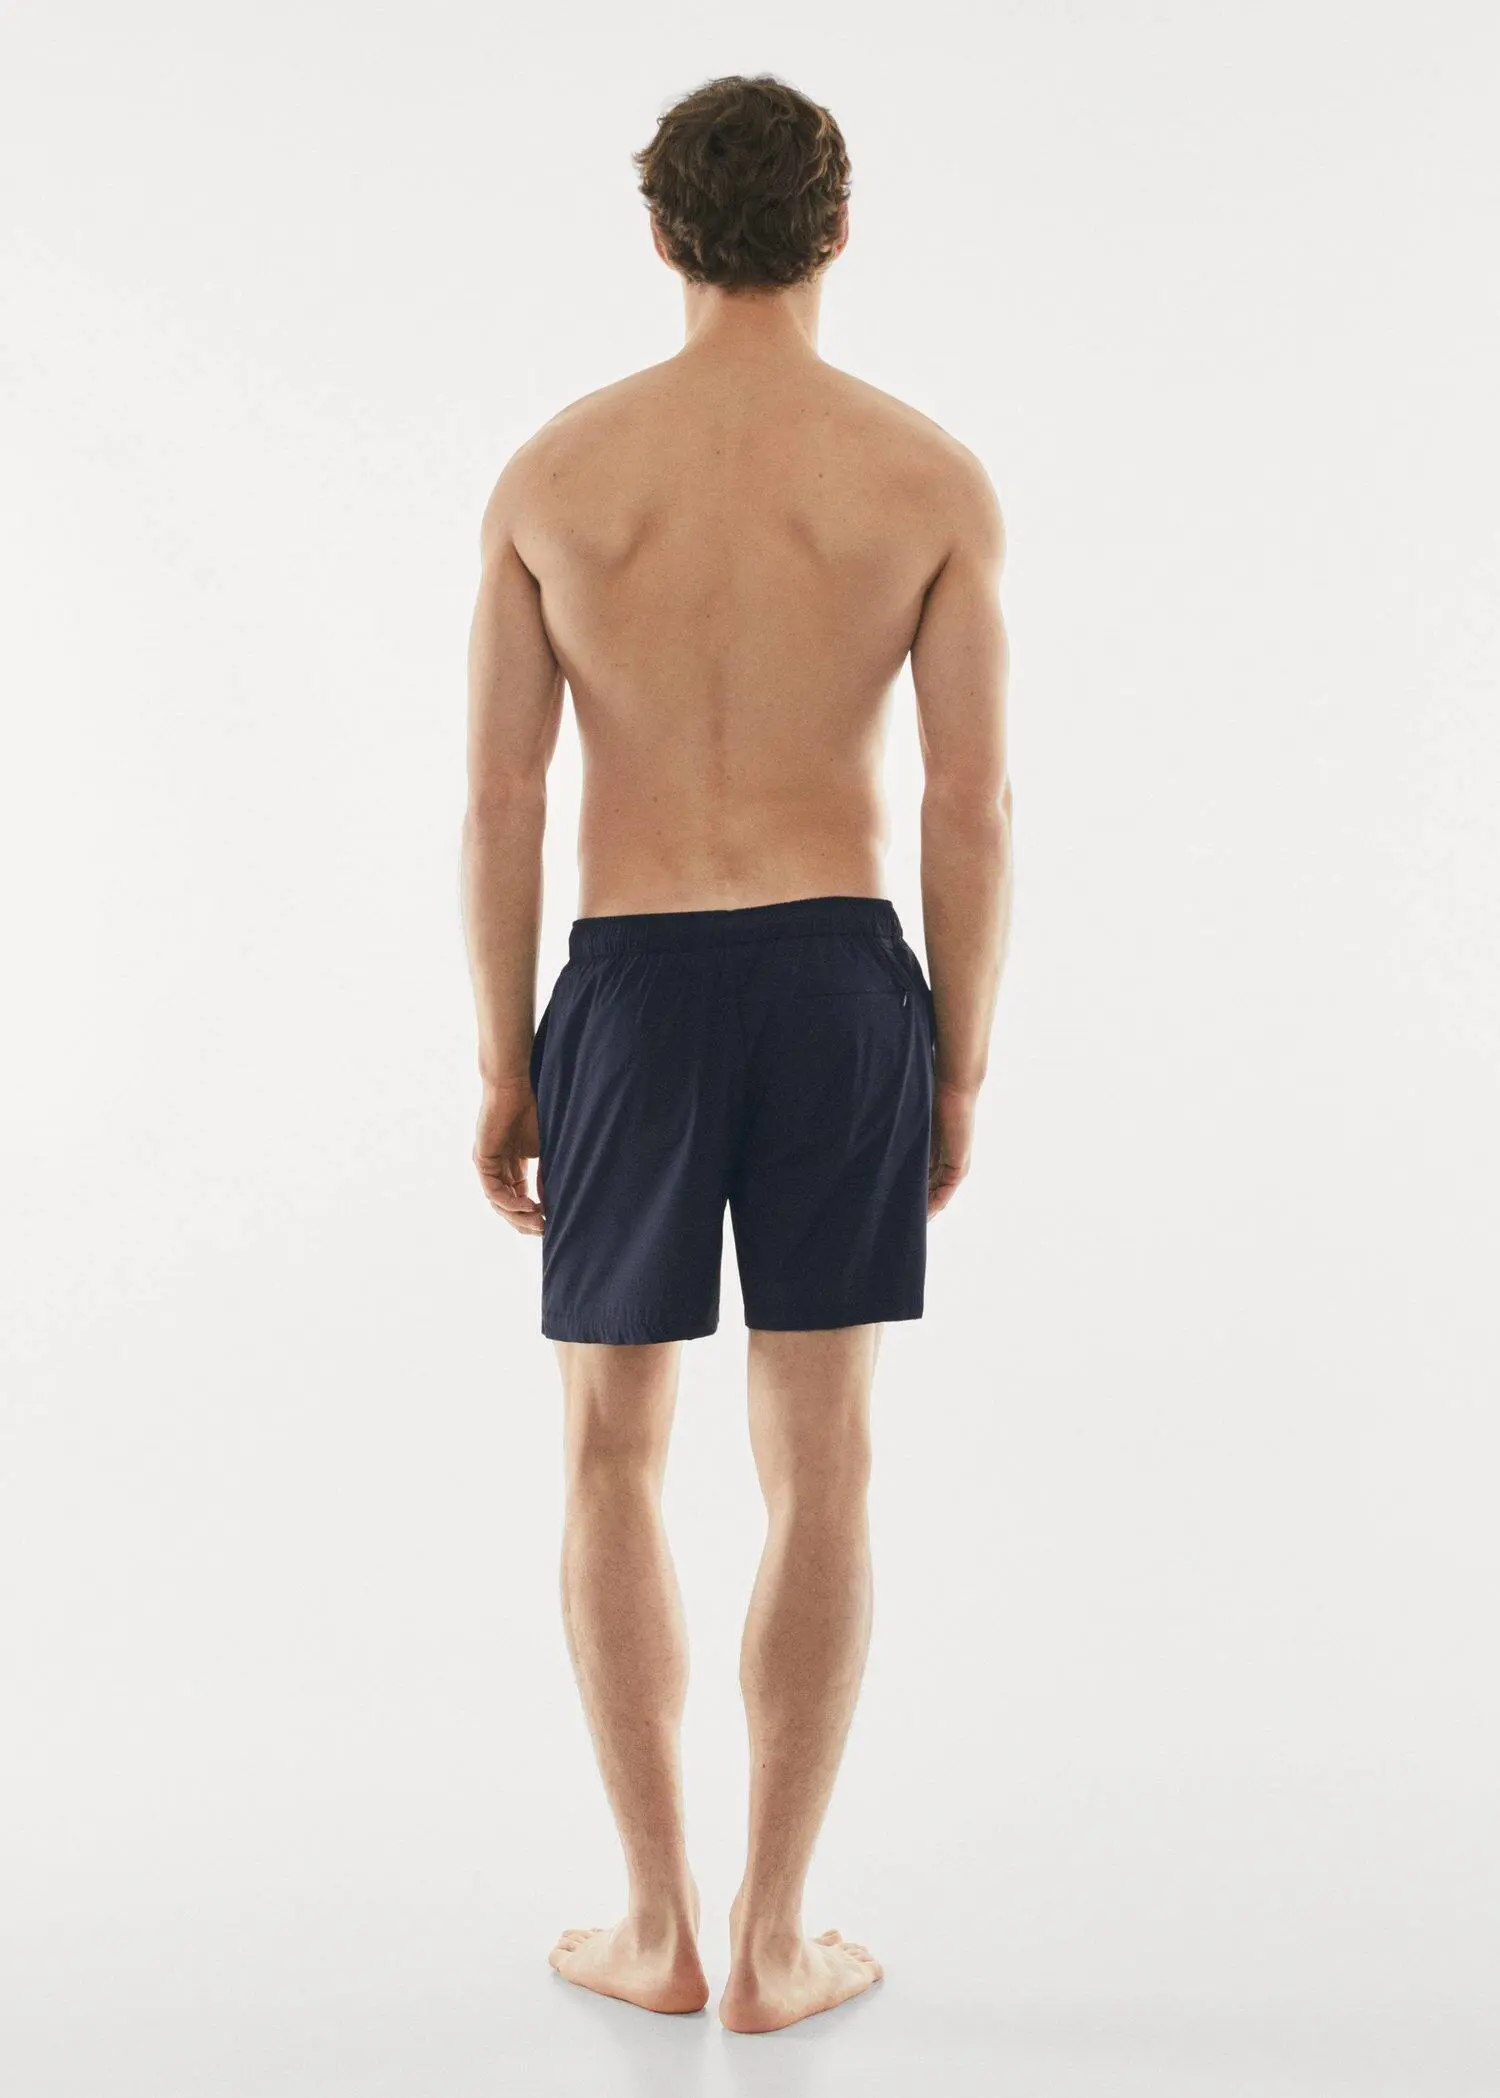 Mango Cord plain swimming trunks. a man standing with his back to the camera. 